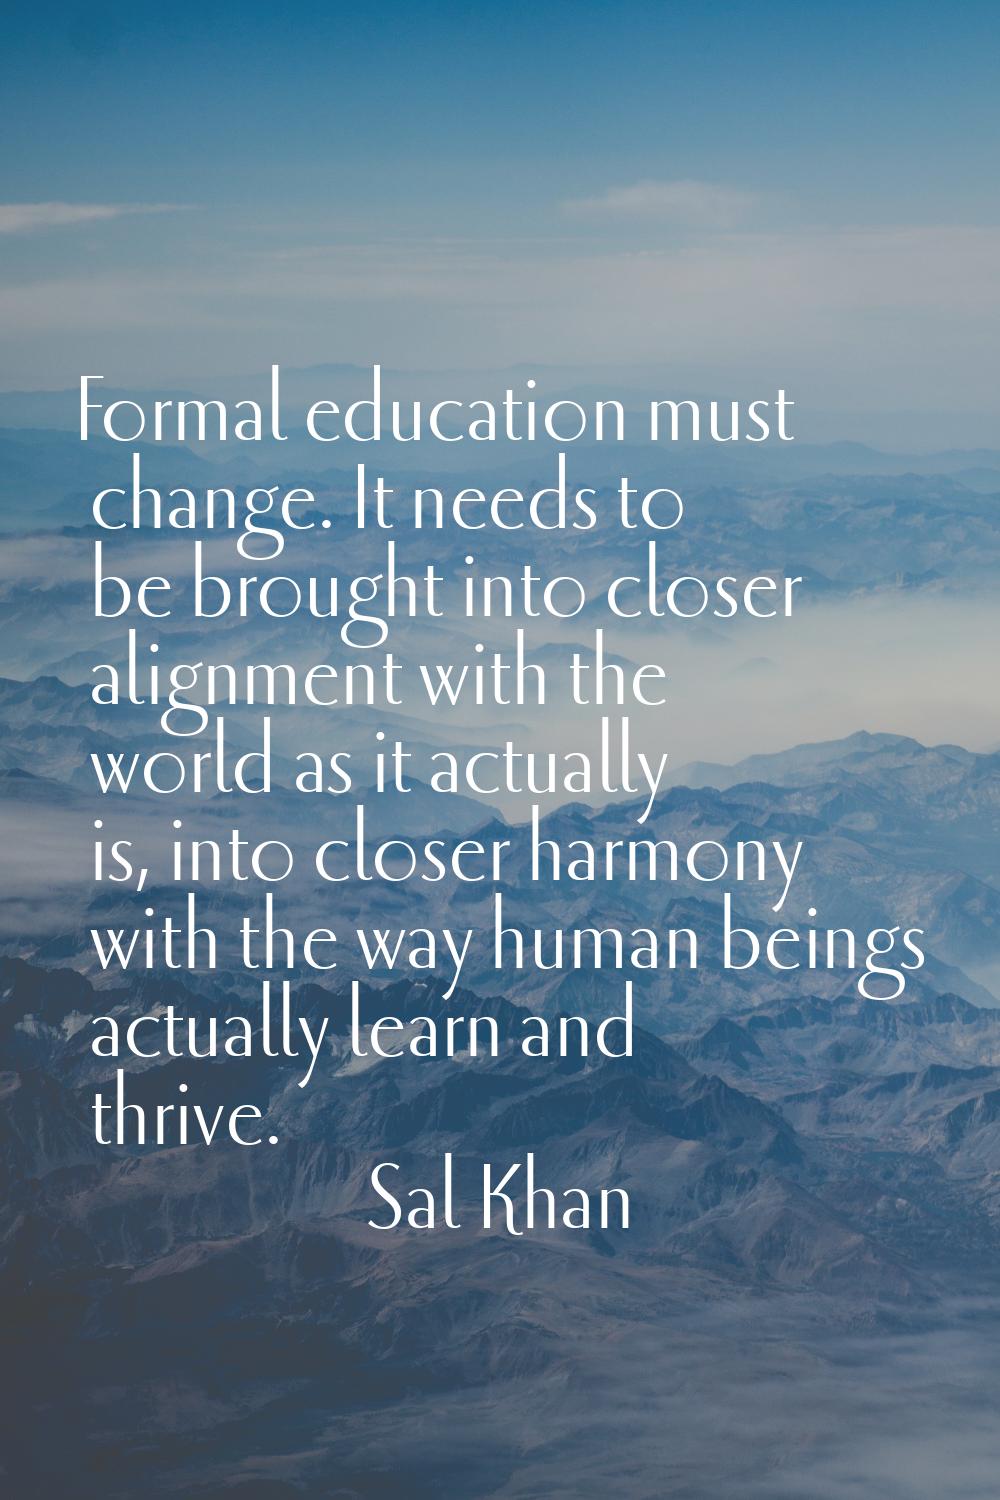 Formal education must change. It needs to be brought into closer alignment with the world as it act